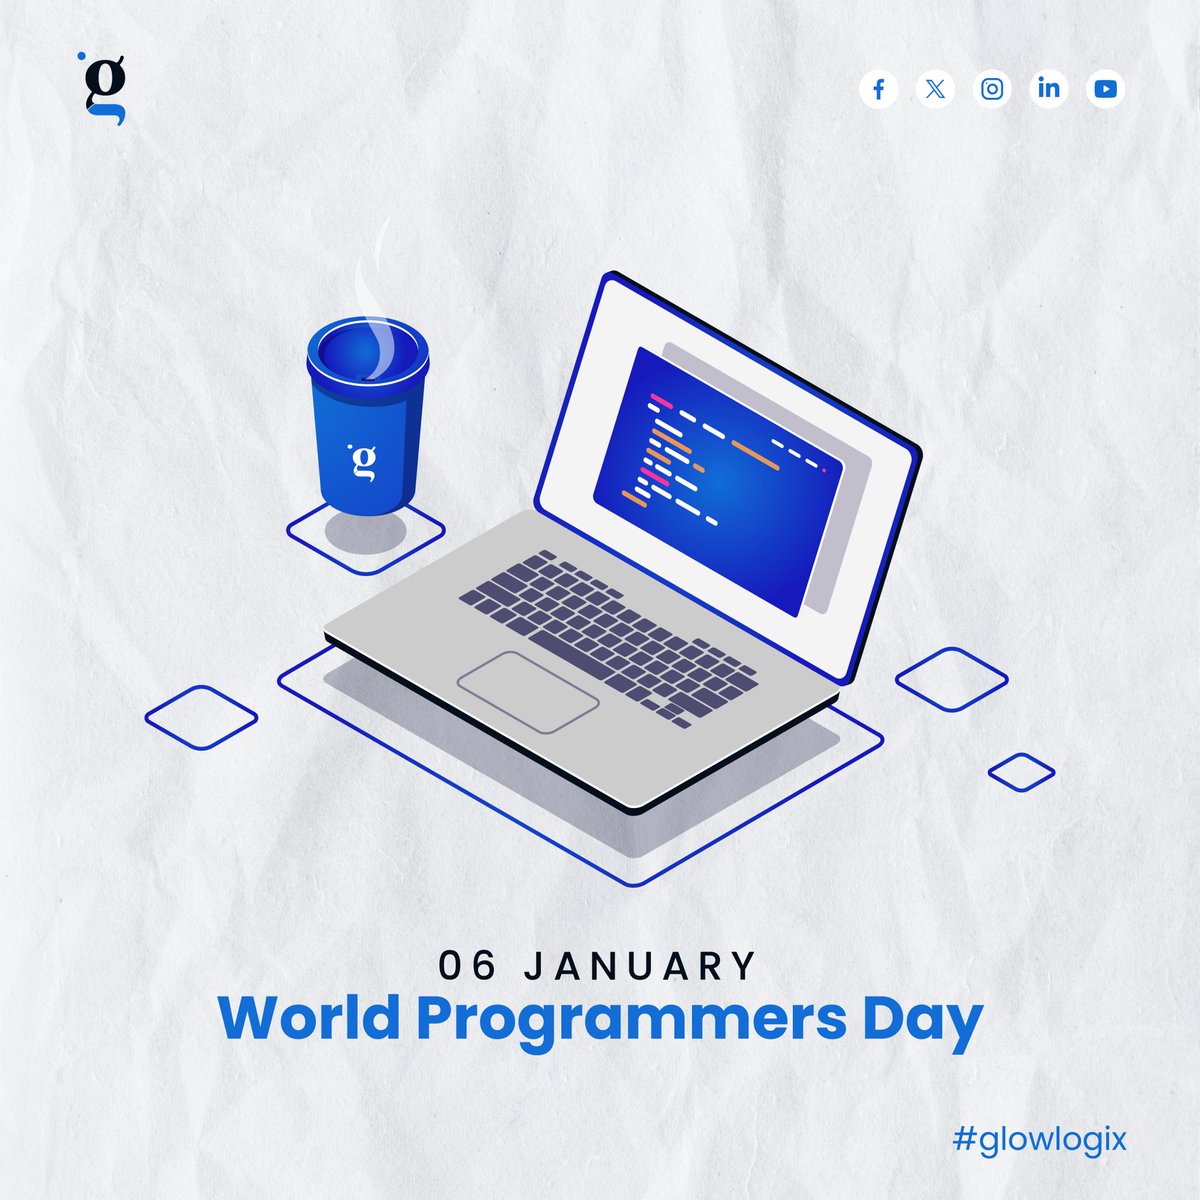 To the brilliant minds influencing the digital future, Happy Programmers' Day! 💻 

Continue developing, coding, and realizing concepts. To all of the code fighters out there, kudos! 🚀👩‍💻👨‍💻

#ProgrammersDay #CodeHeroes #InnovationCreators #glowlogix